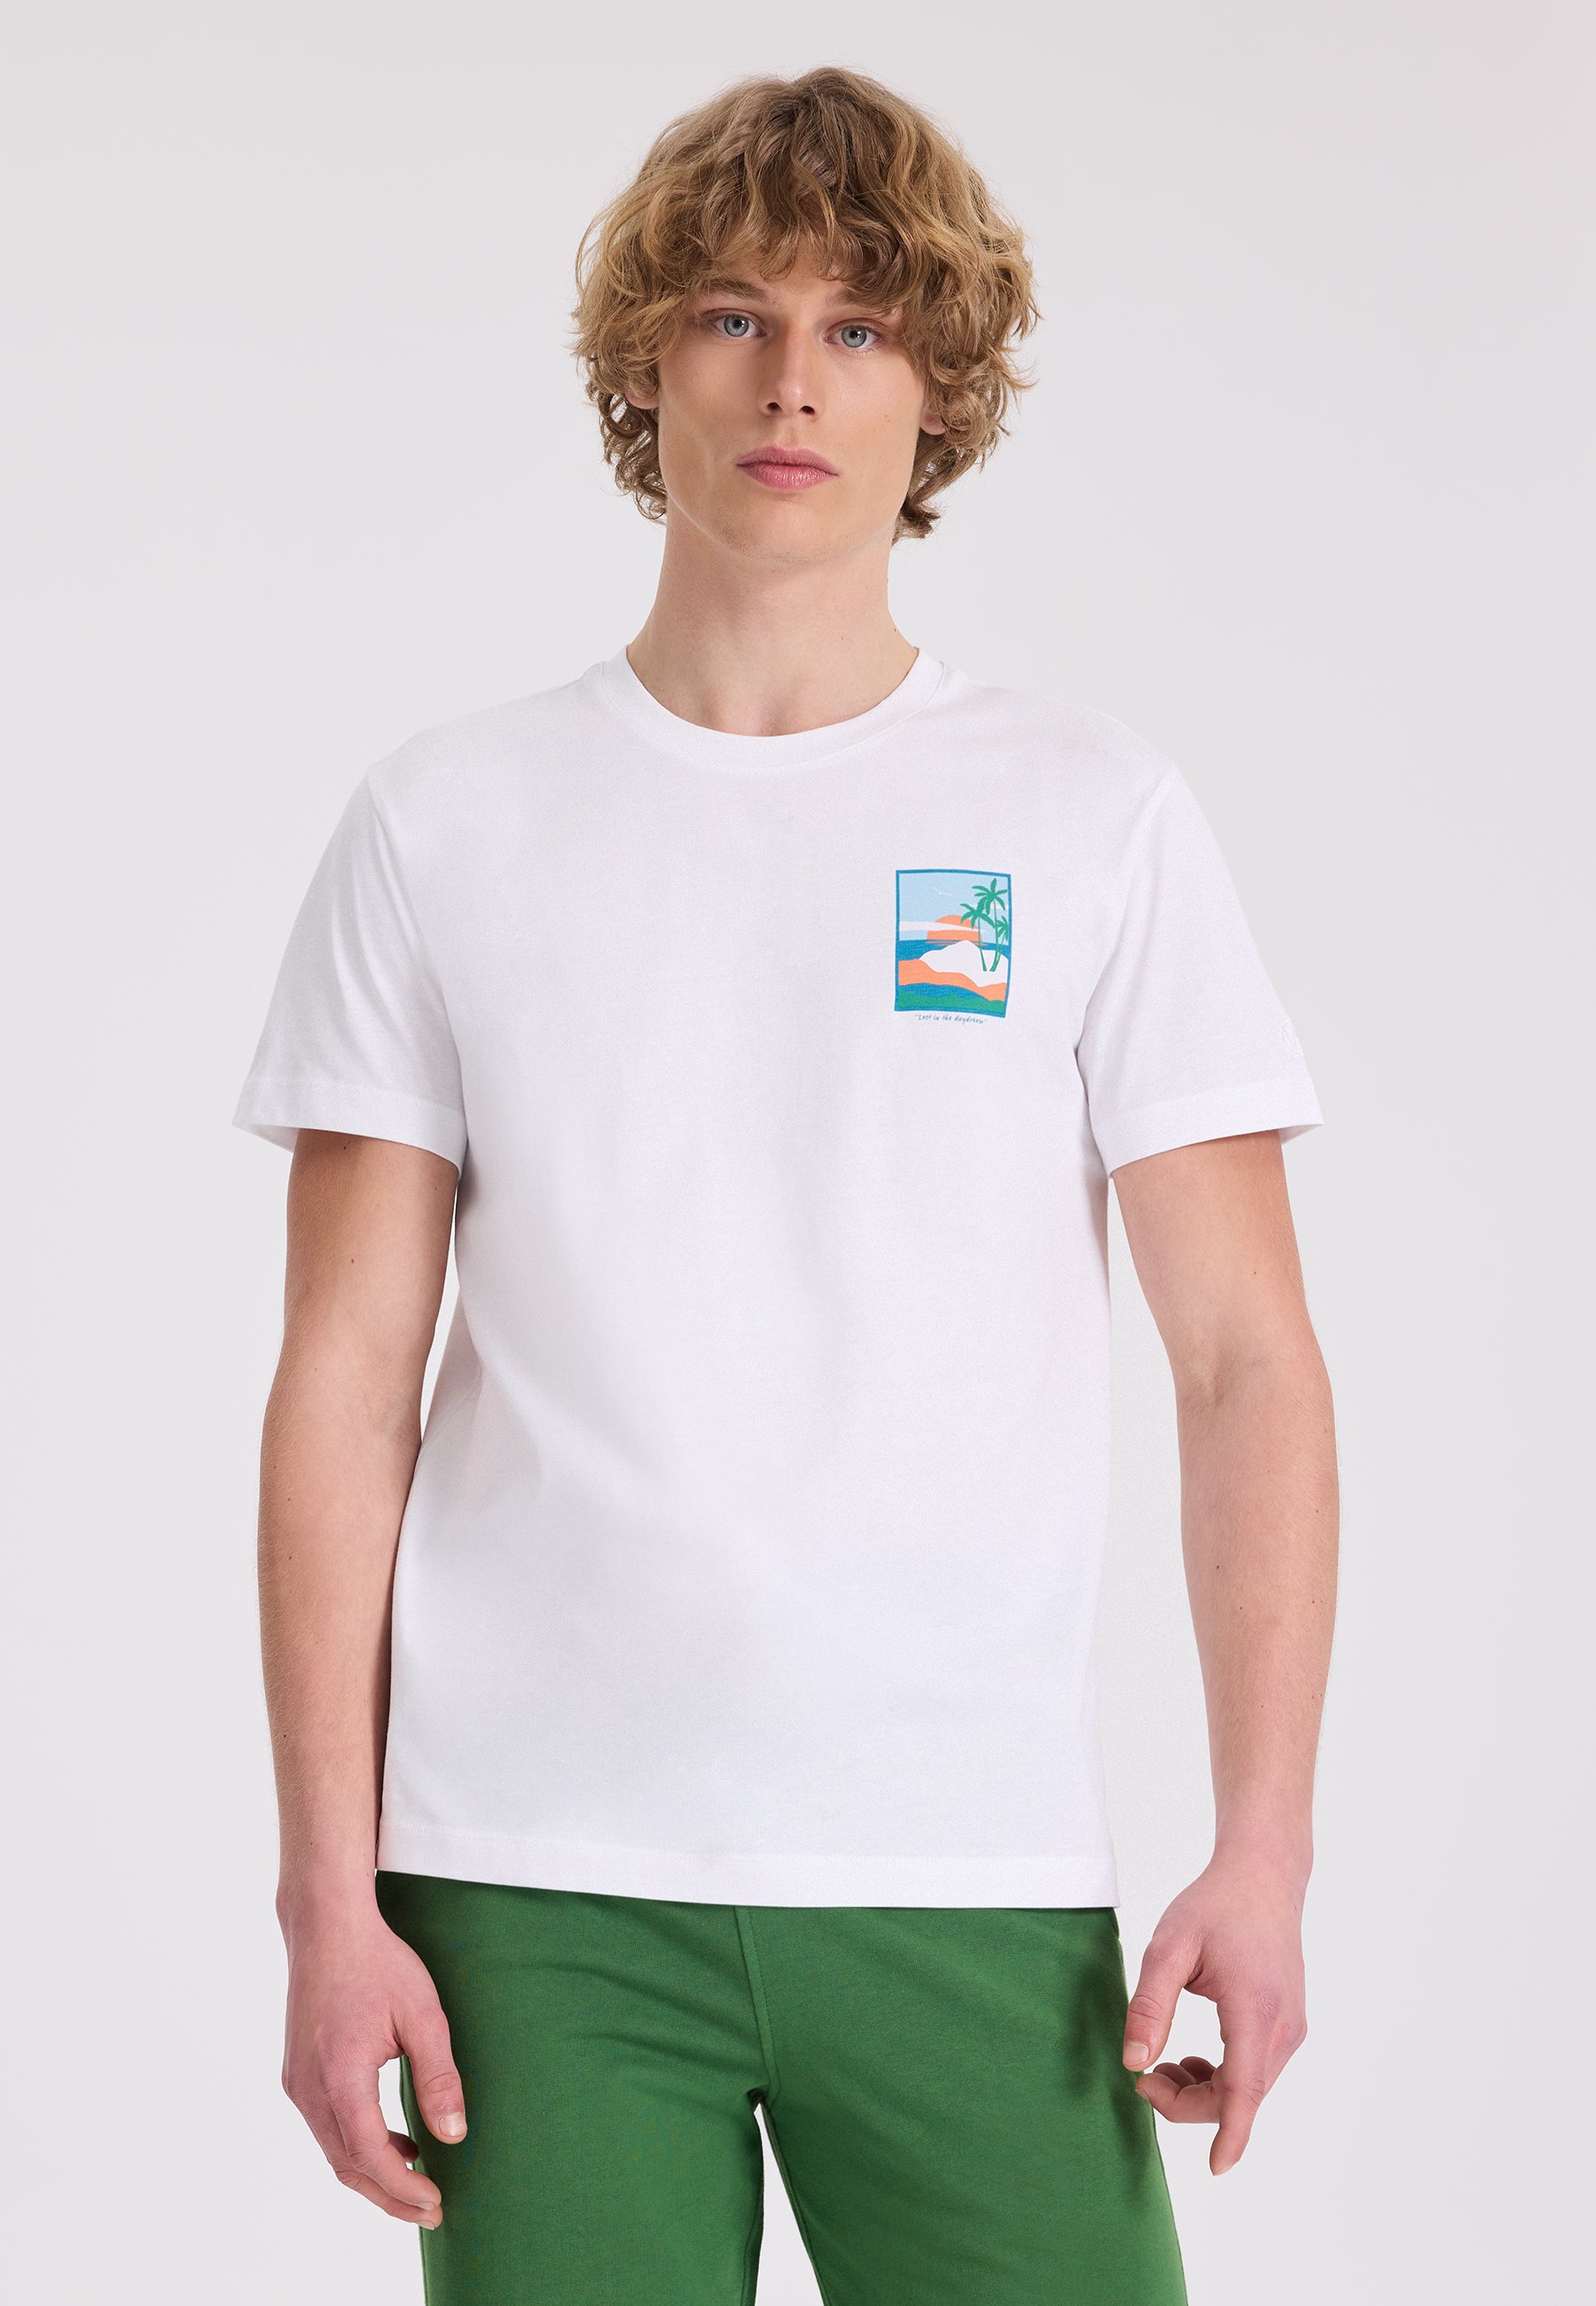 WMBACK SUNSET TEE in White